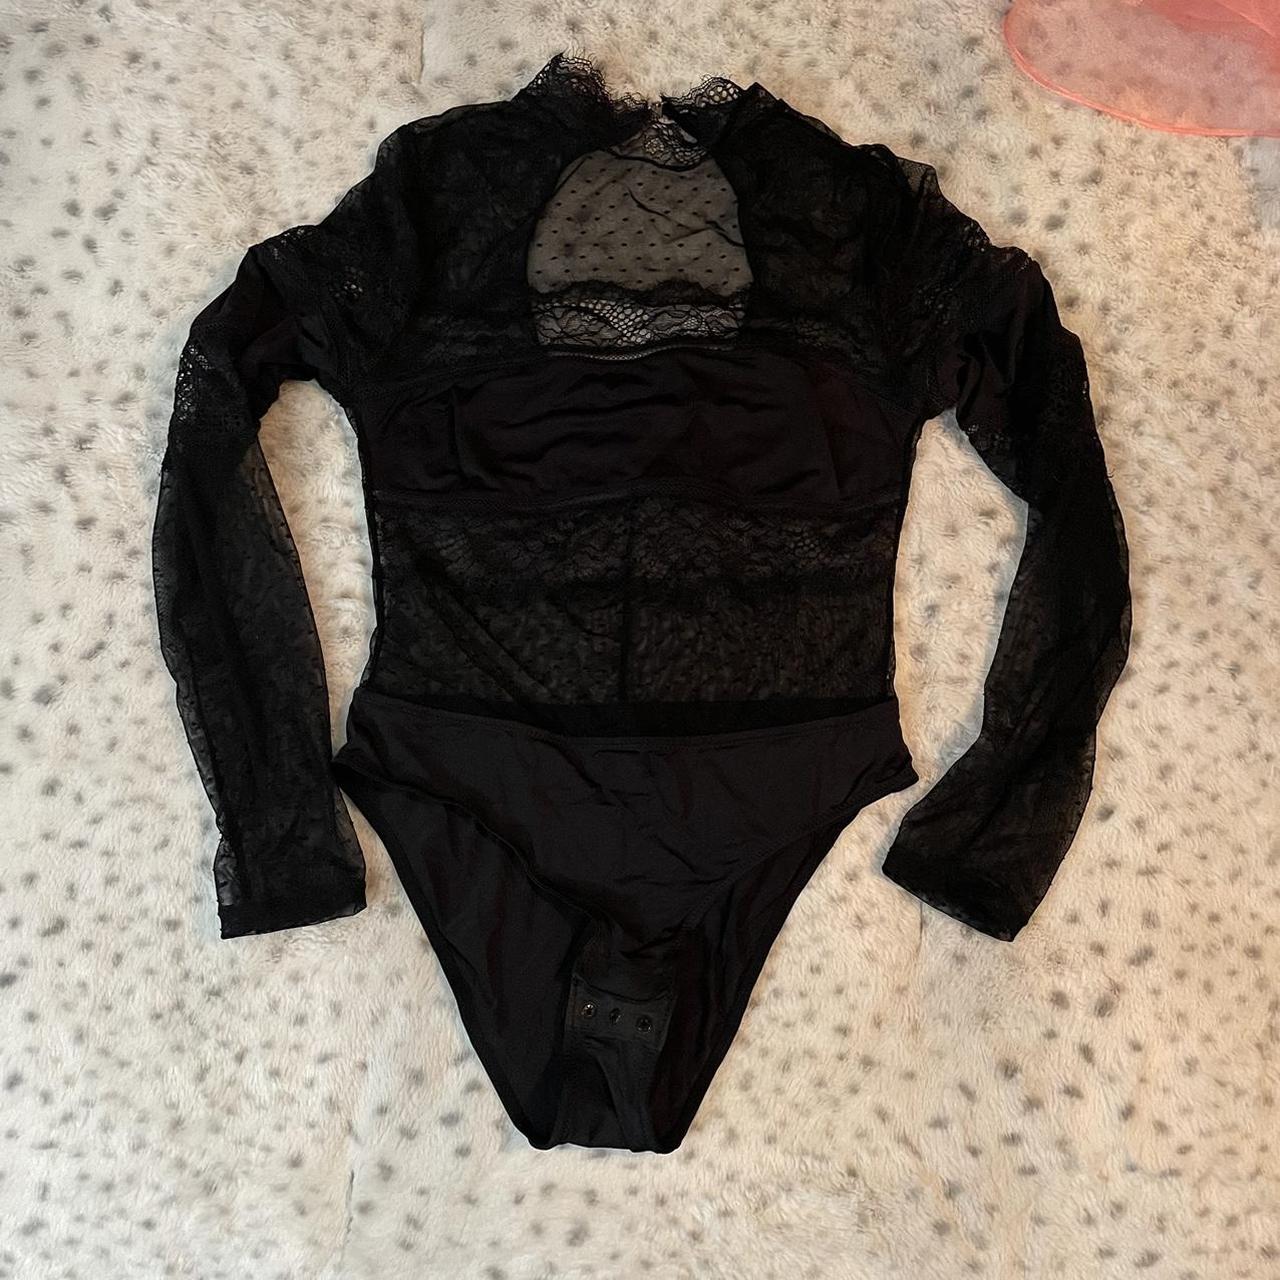 Thistle & spire black lace body suit small new